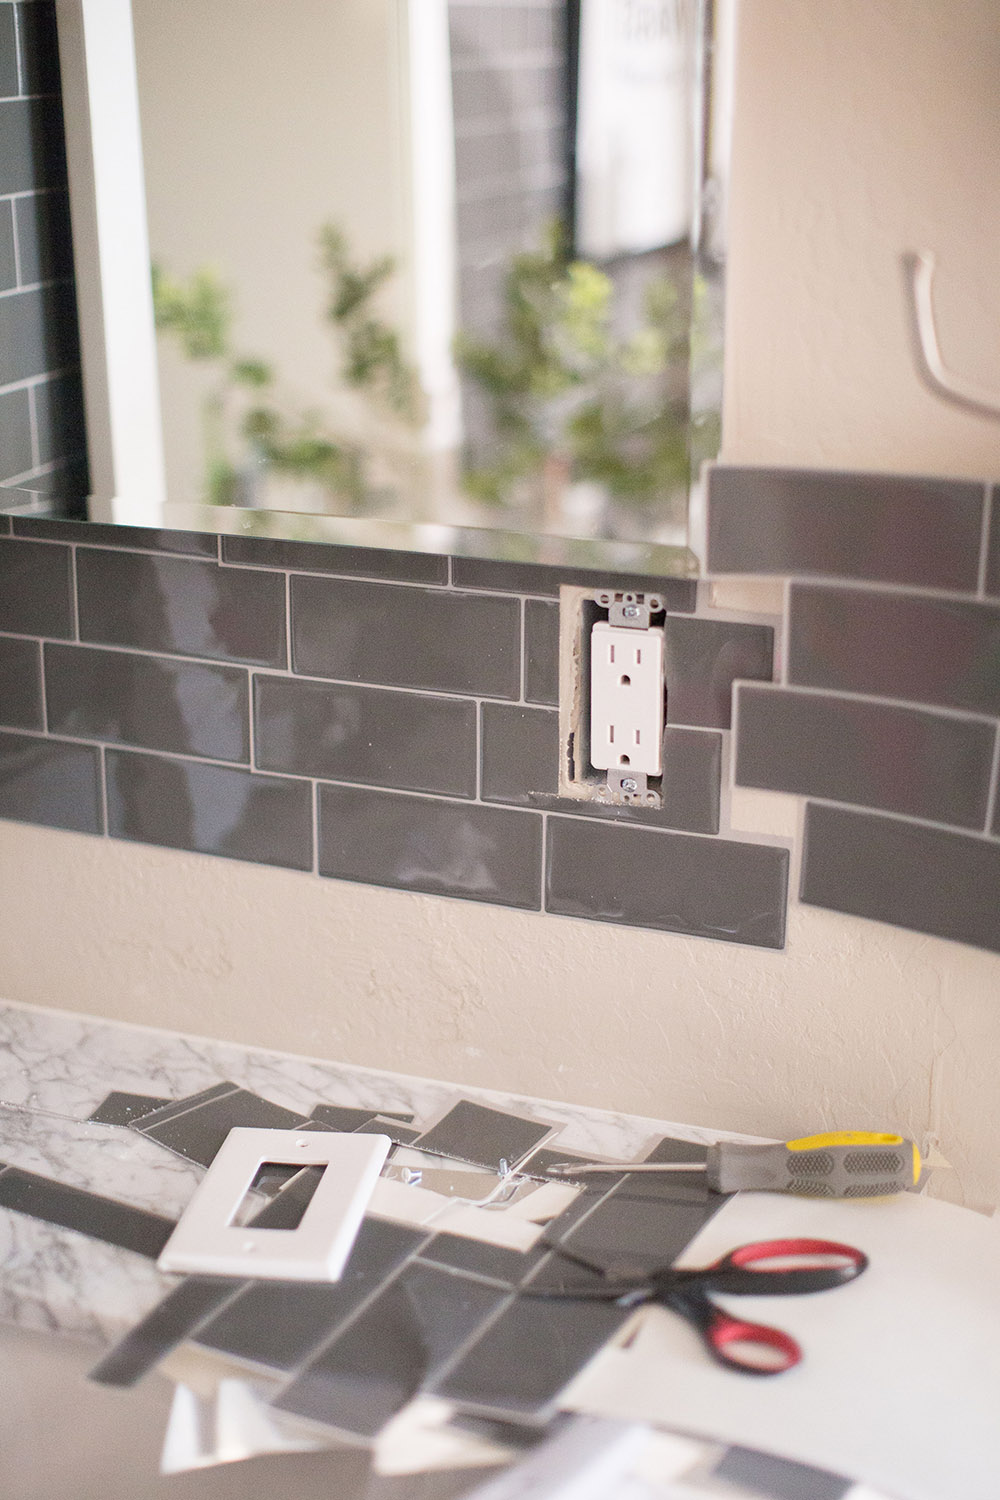 Transform Your Bathroom With Peel and Stick Tiles